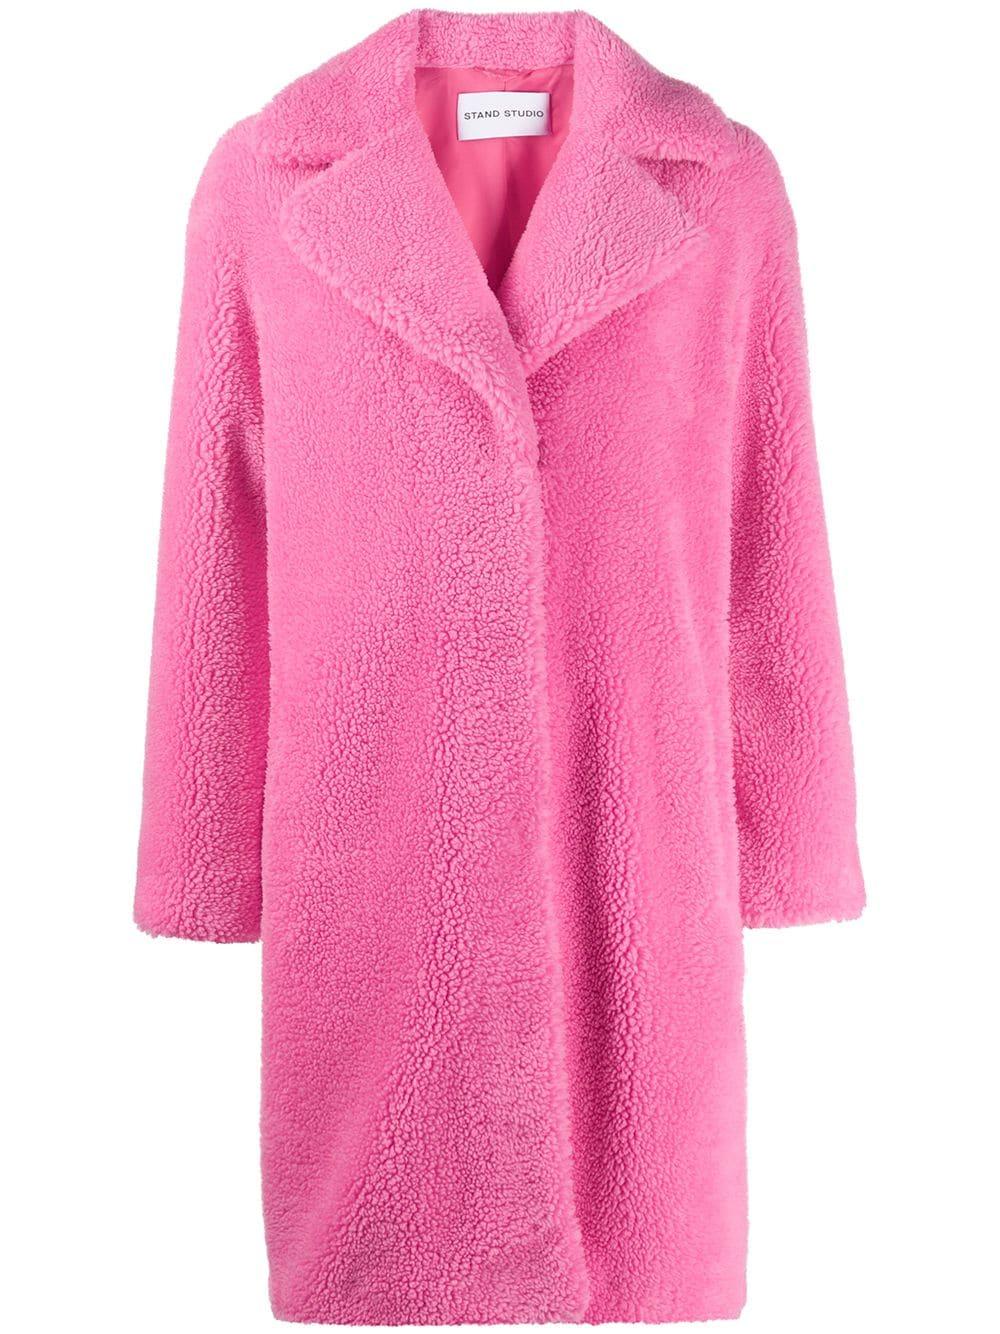 Stand Studio Bubble Gum Coat in Pink - Save 22% - Lyst